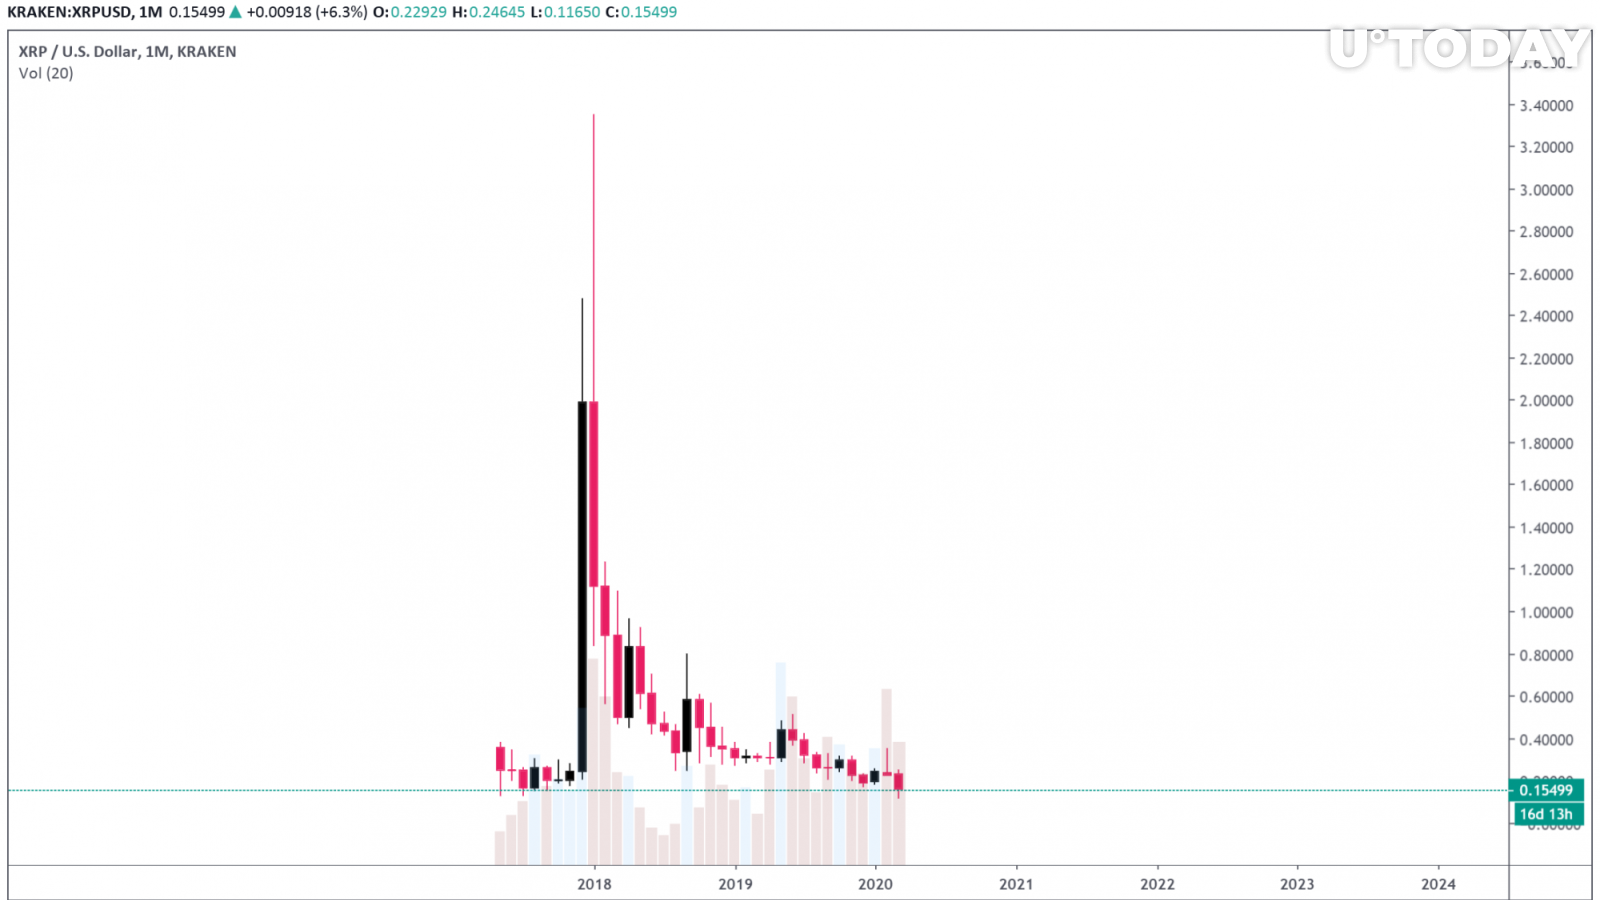 The price of XRP fell to a multi-year low